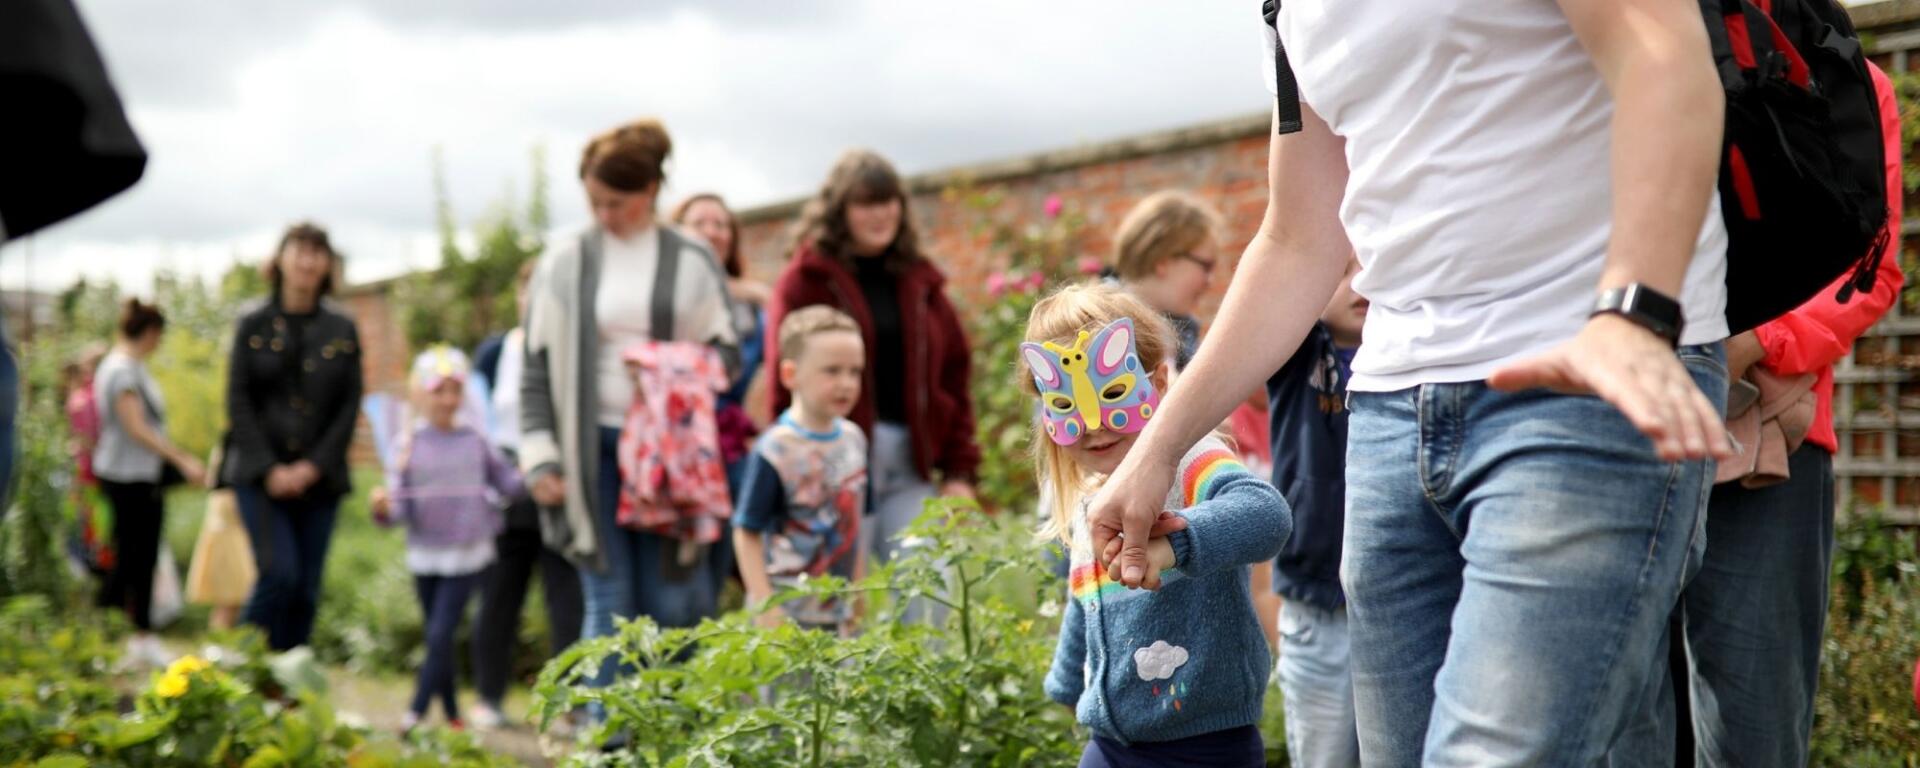 Family Exploring The Walled Garden Dressed As Butterflies At Togetherfest 2019